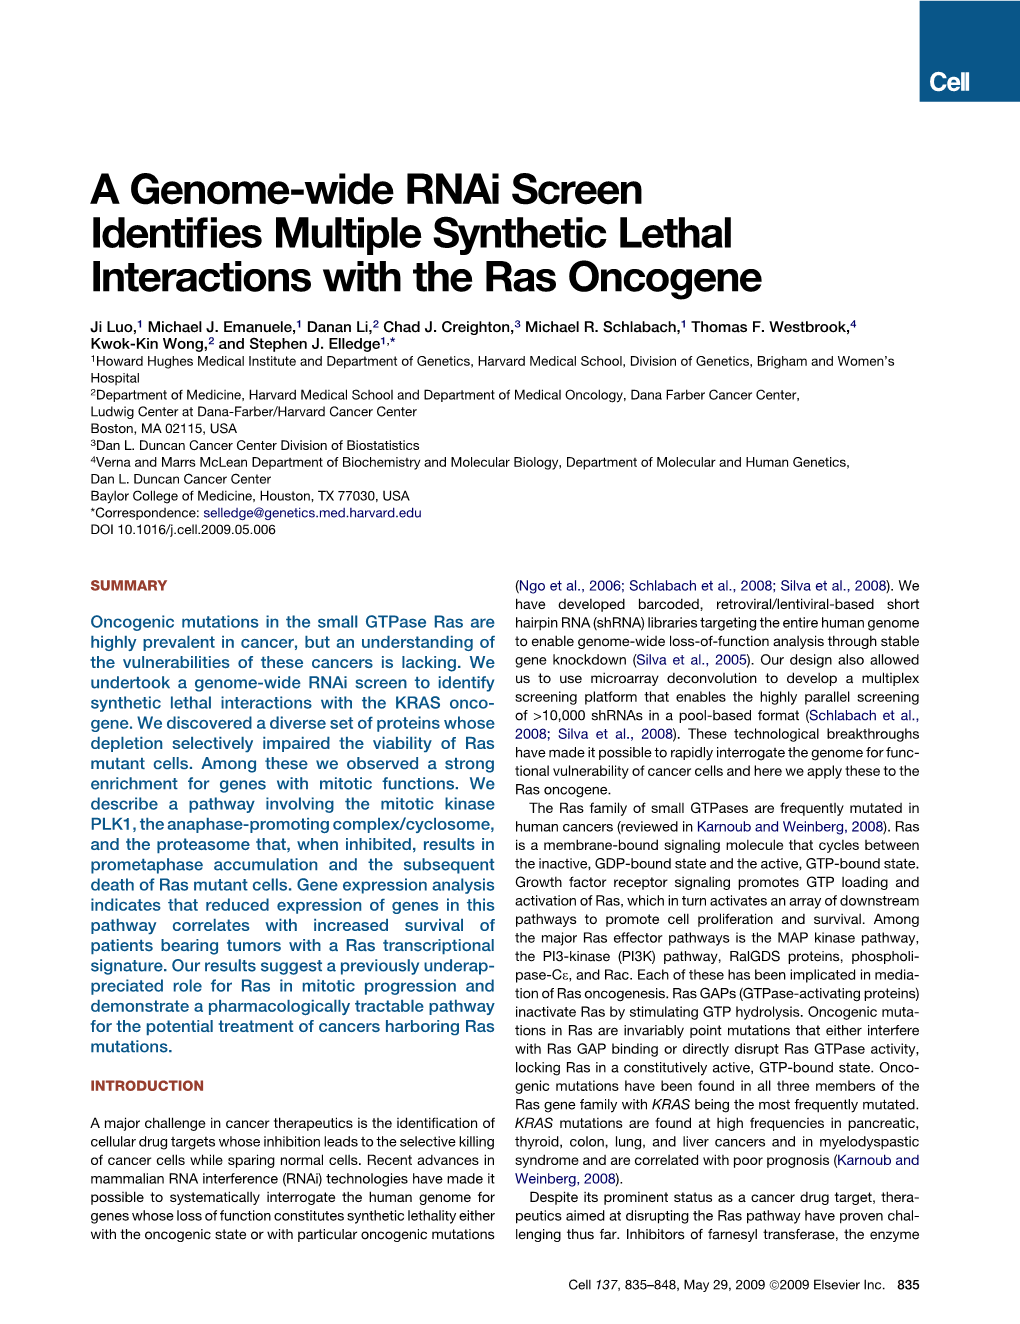 A Genome-Wide Rnai Screen Identifies Multiple Synthetic Lethal